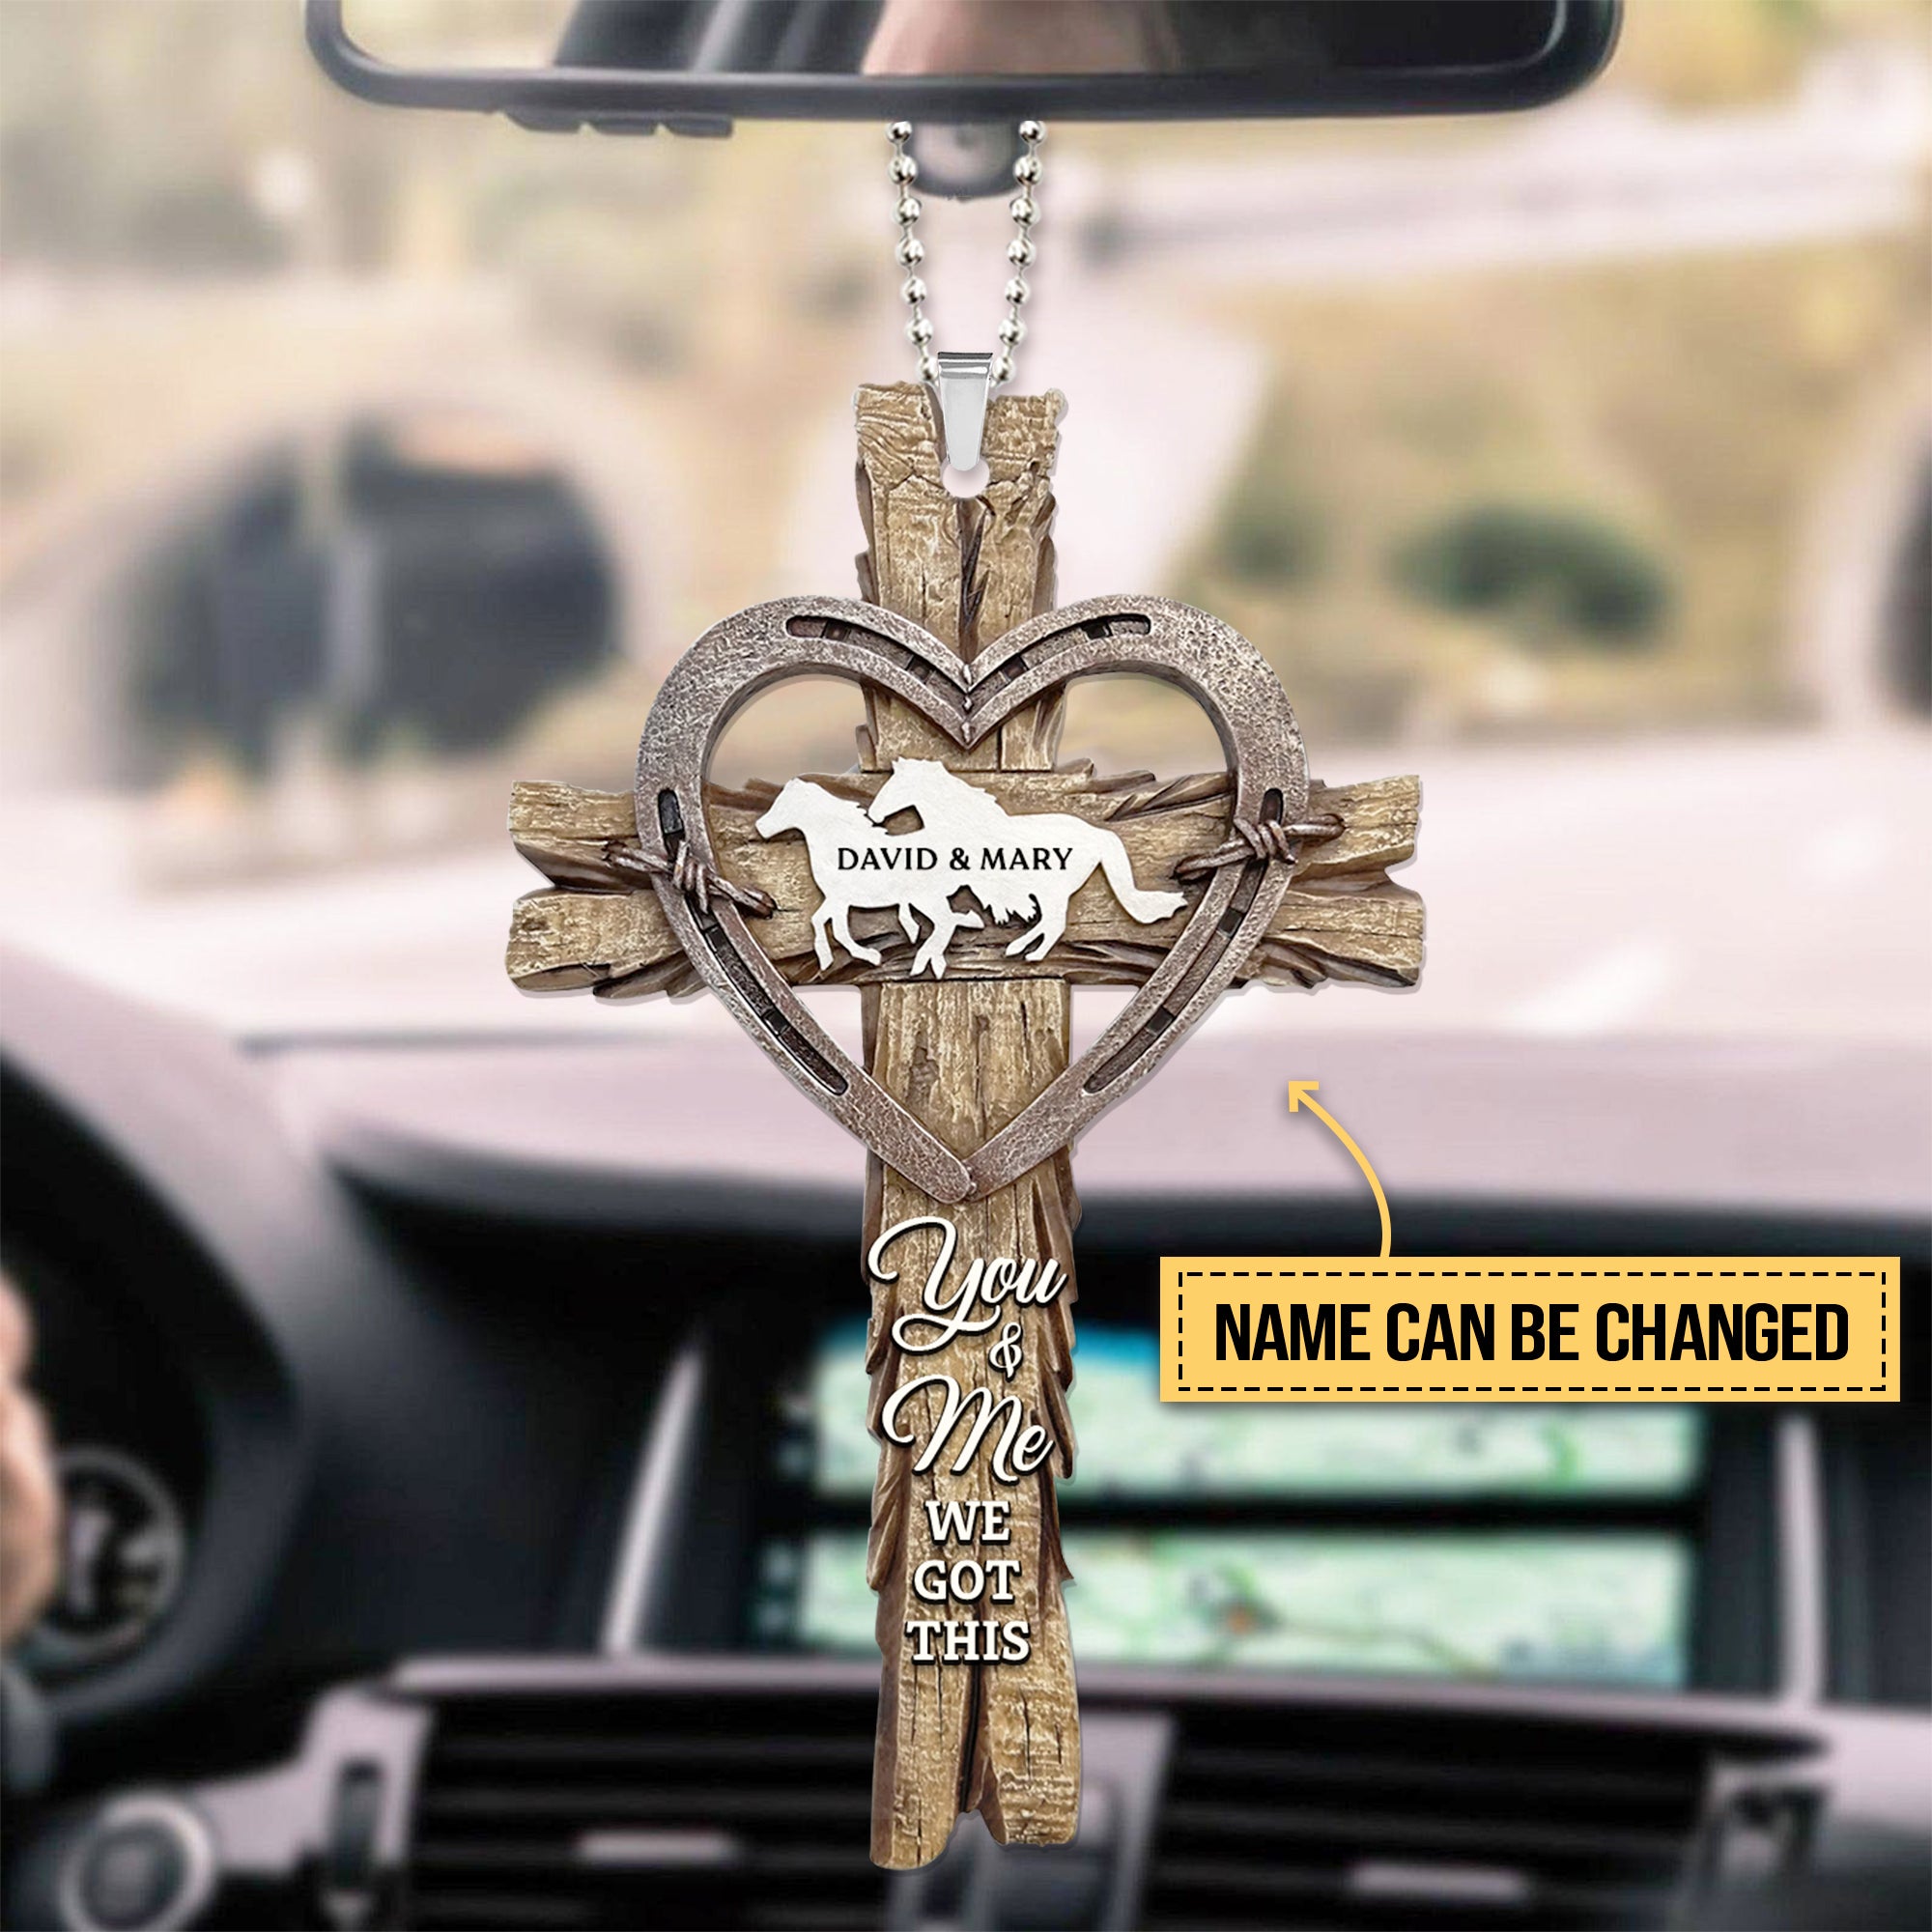 Horse Couple You & Me We Got This, Personalized Car Ornament For Horse Lovers